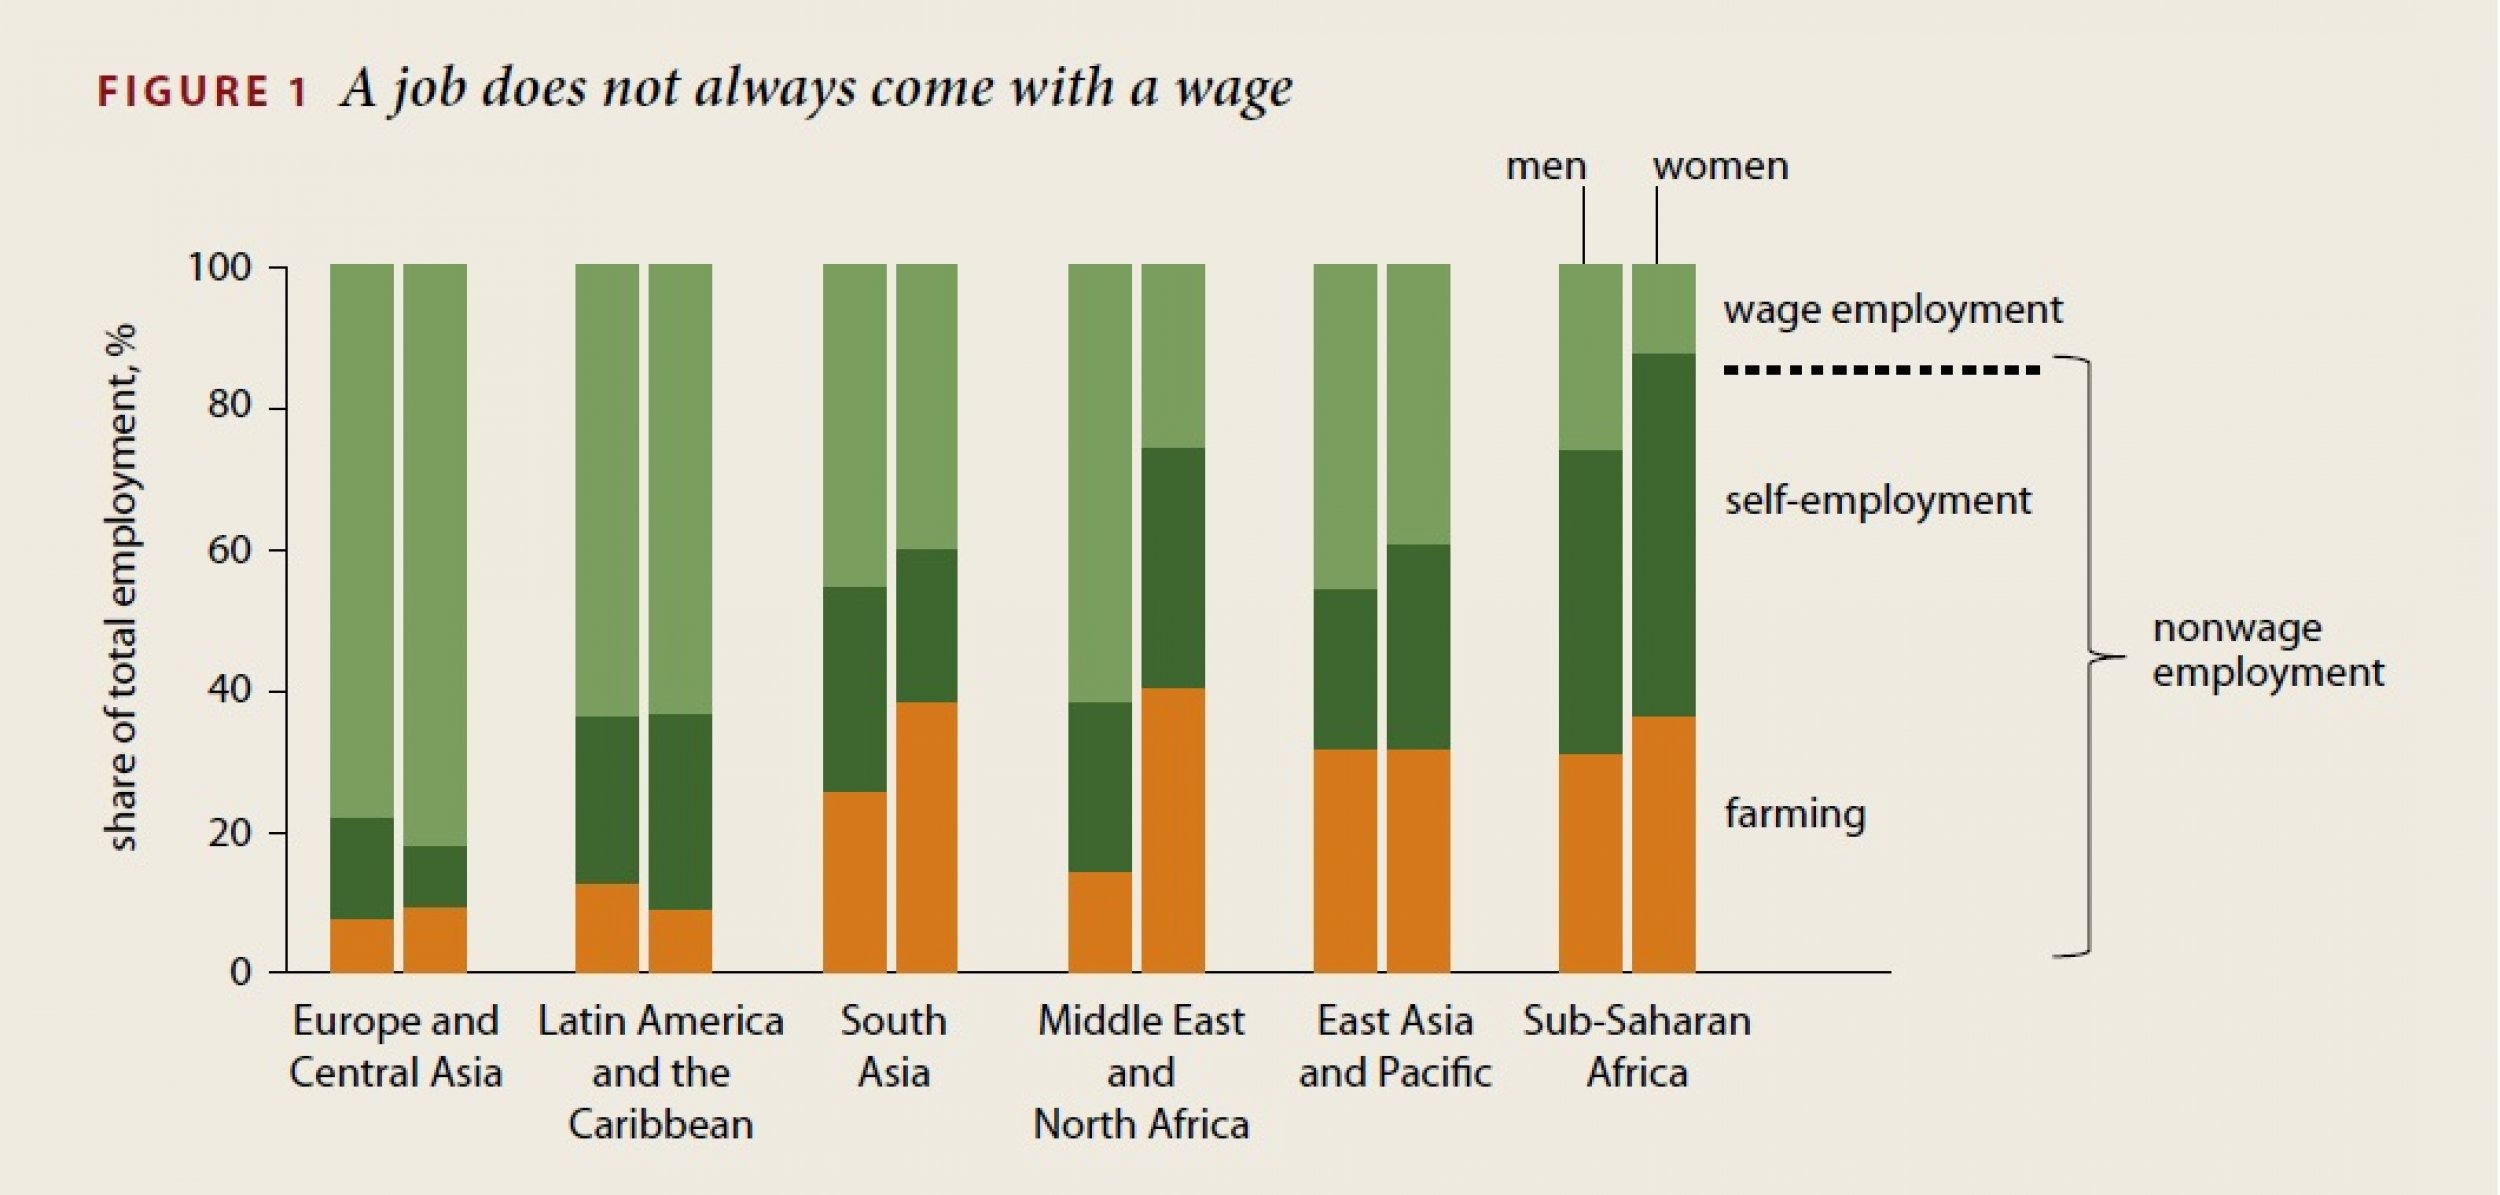 Surprise 7 The divergences between wage employment and self-employment are culturally driven.